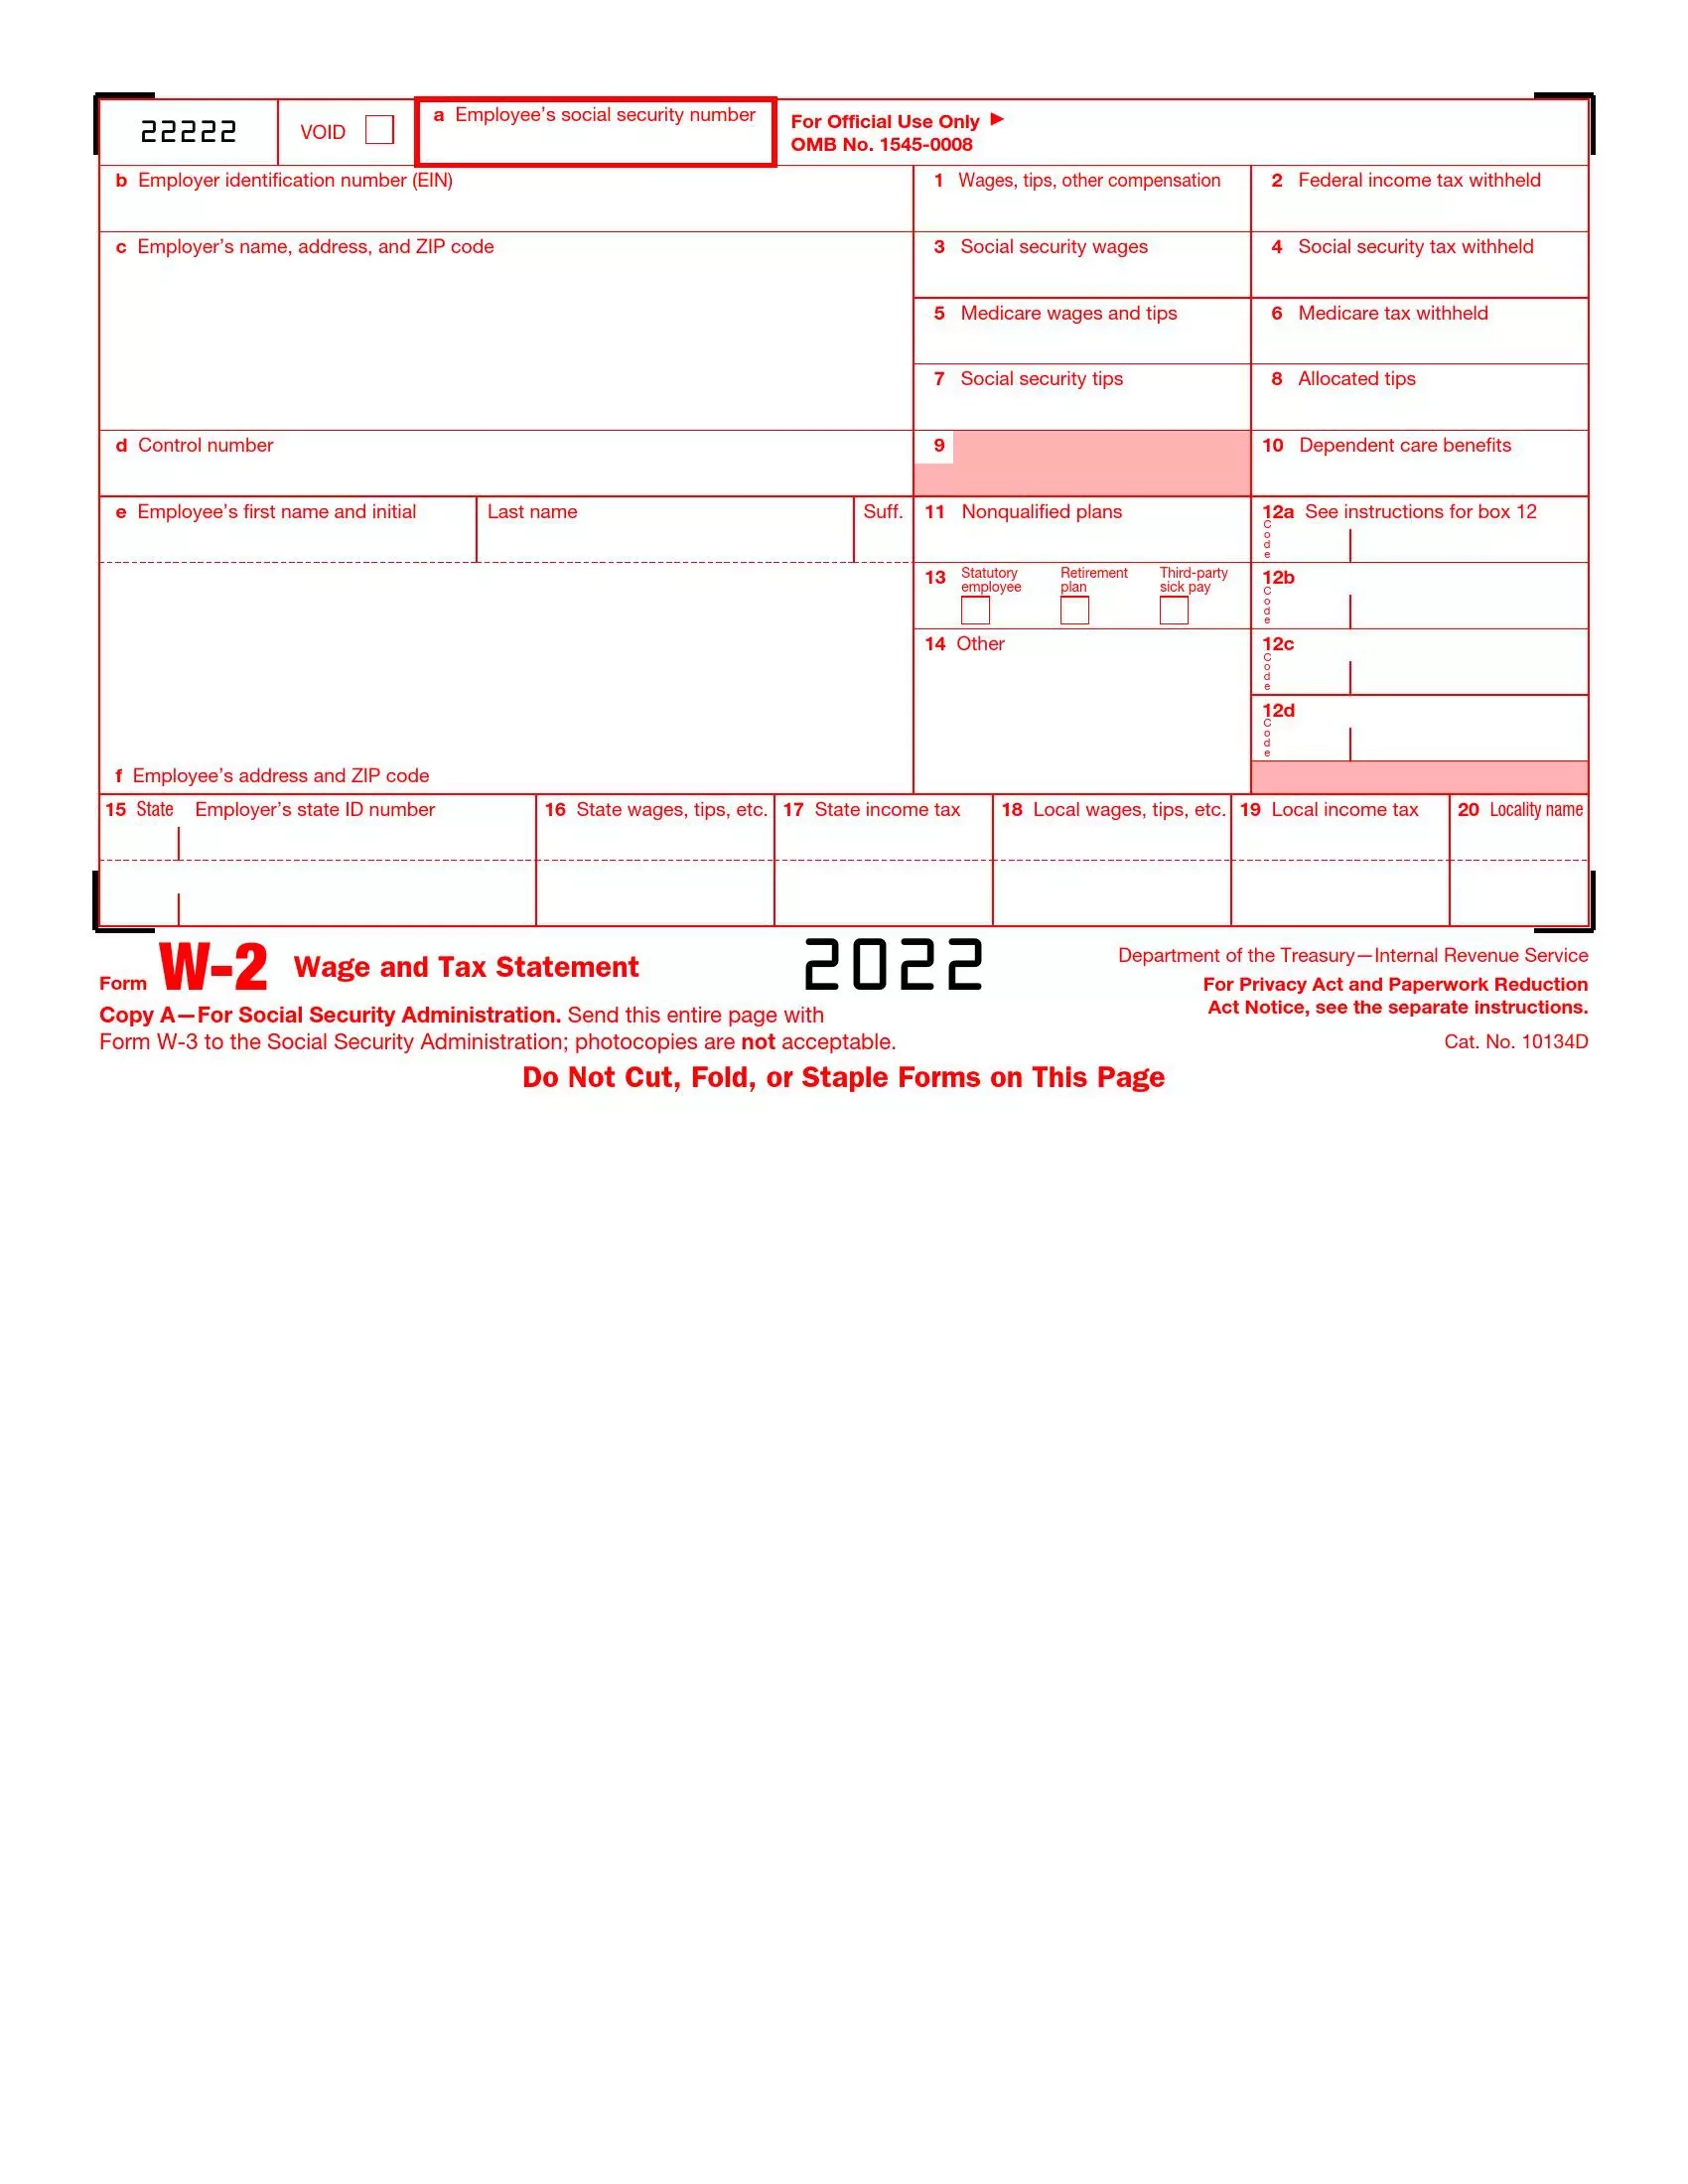 Irs Form W-2 ≡ Fill Out Printable Pdf Forms Online pertaining to W2 Form Online Access